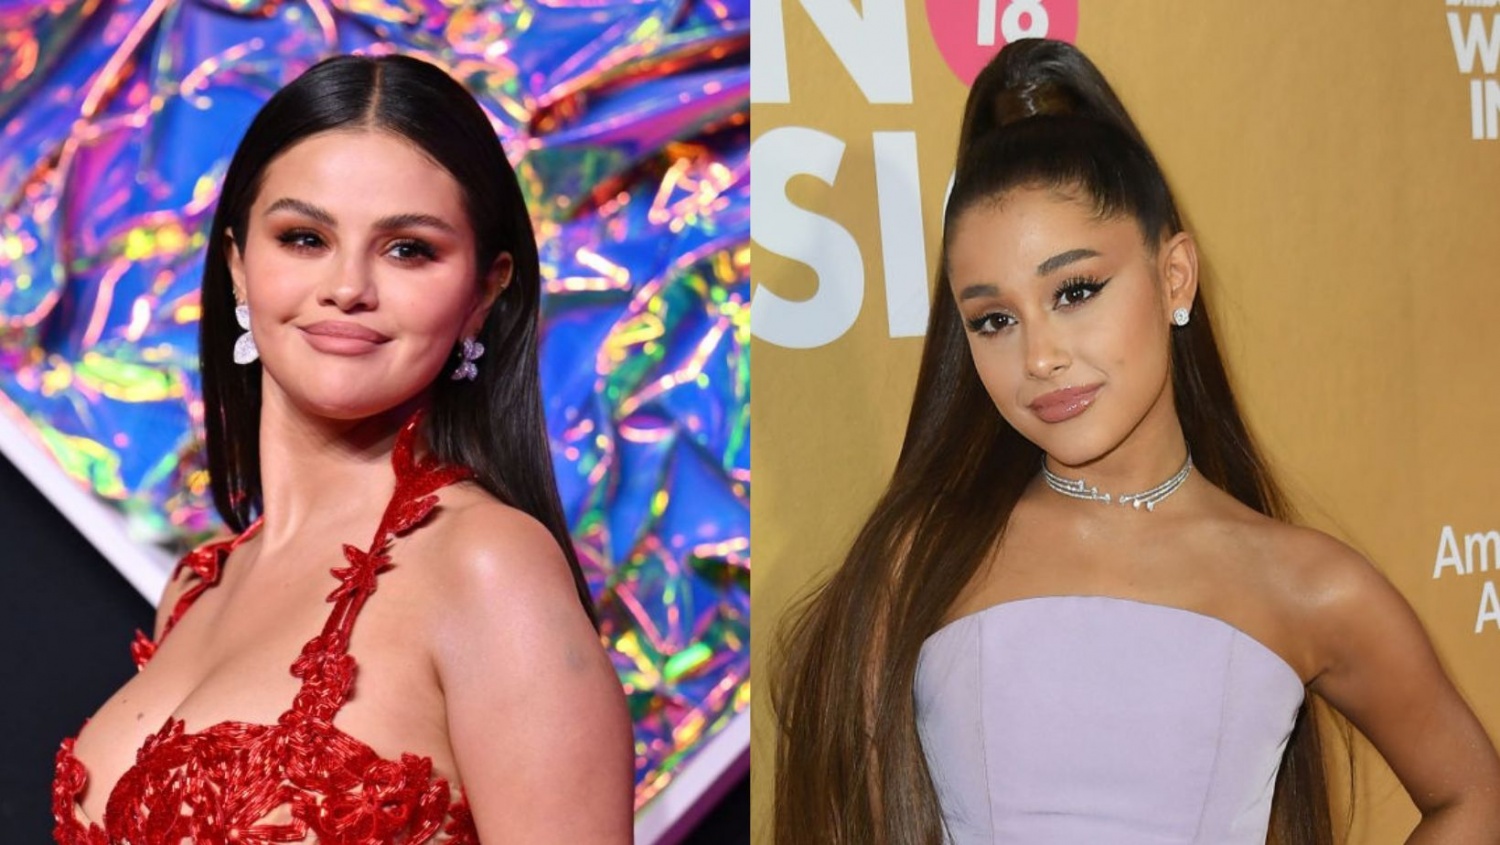 Selena Gomez Vs. Ariana Grande: Fans Get Into INTENSE Argument, Who Is Better?